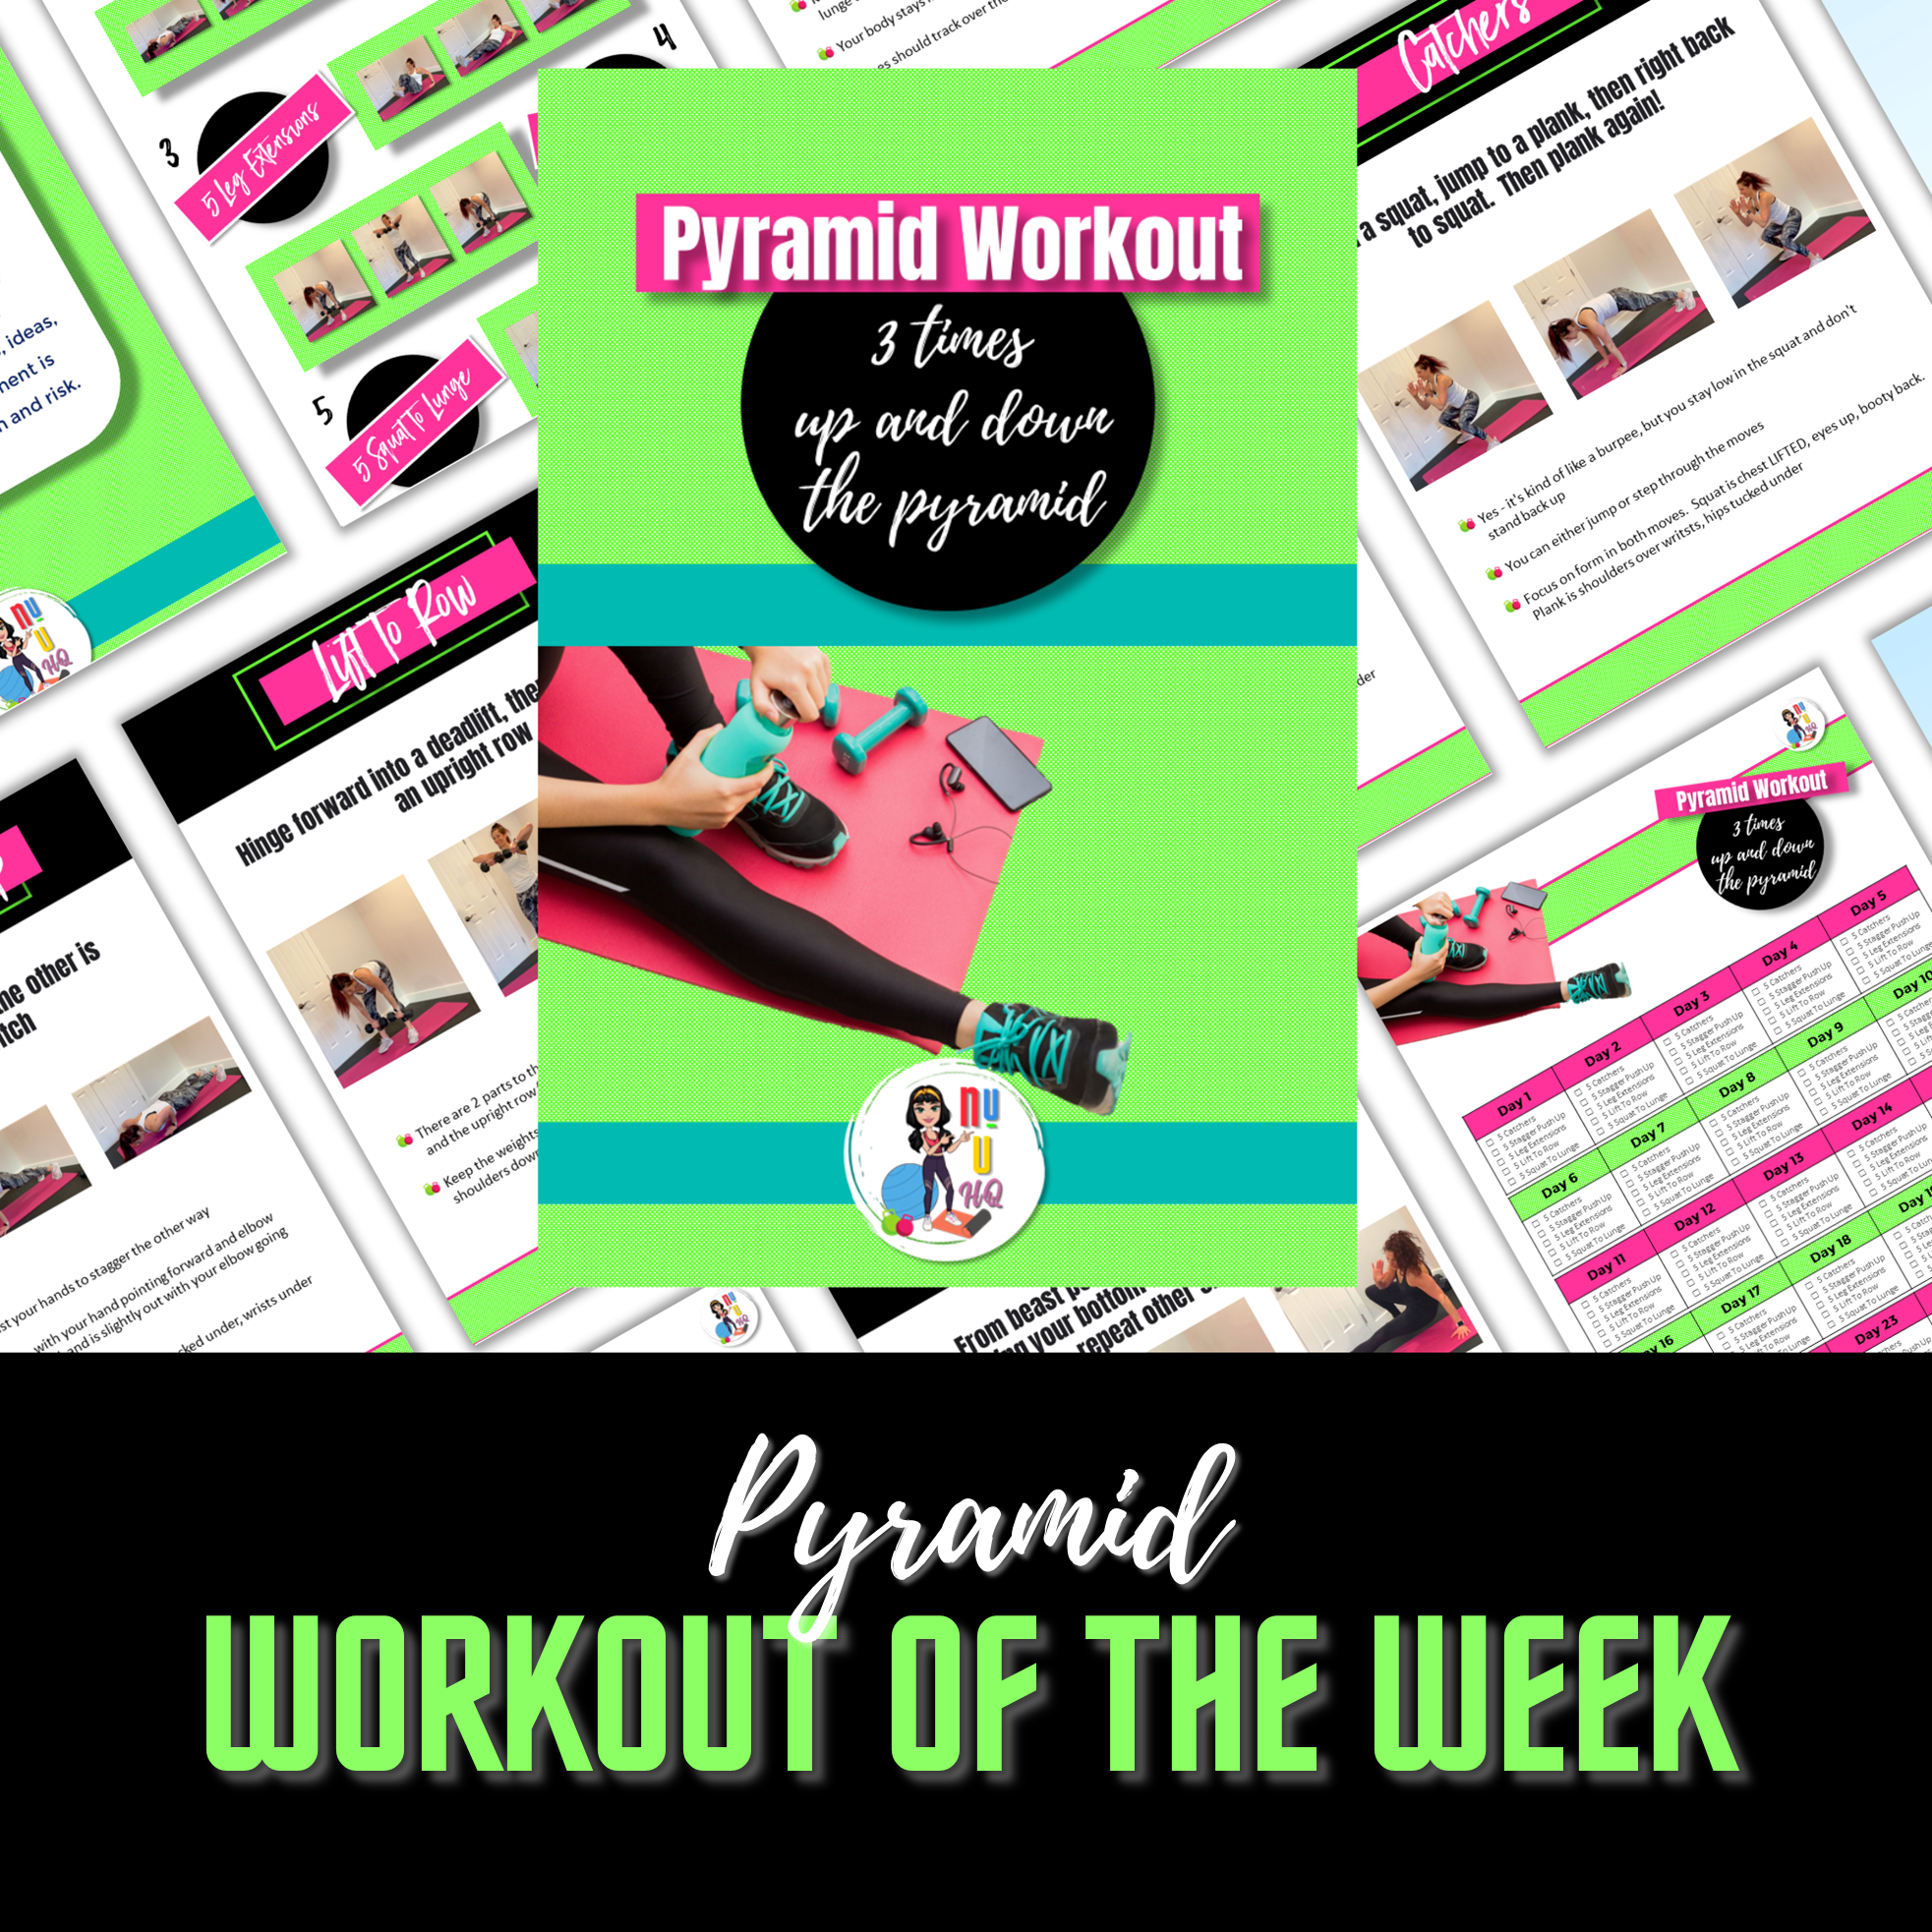 Workout of the week WOW: Pyramid